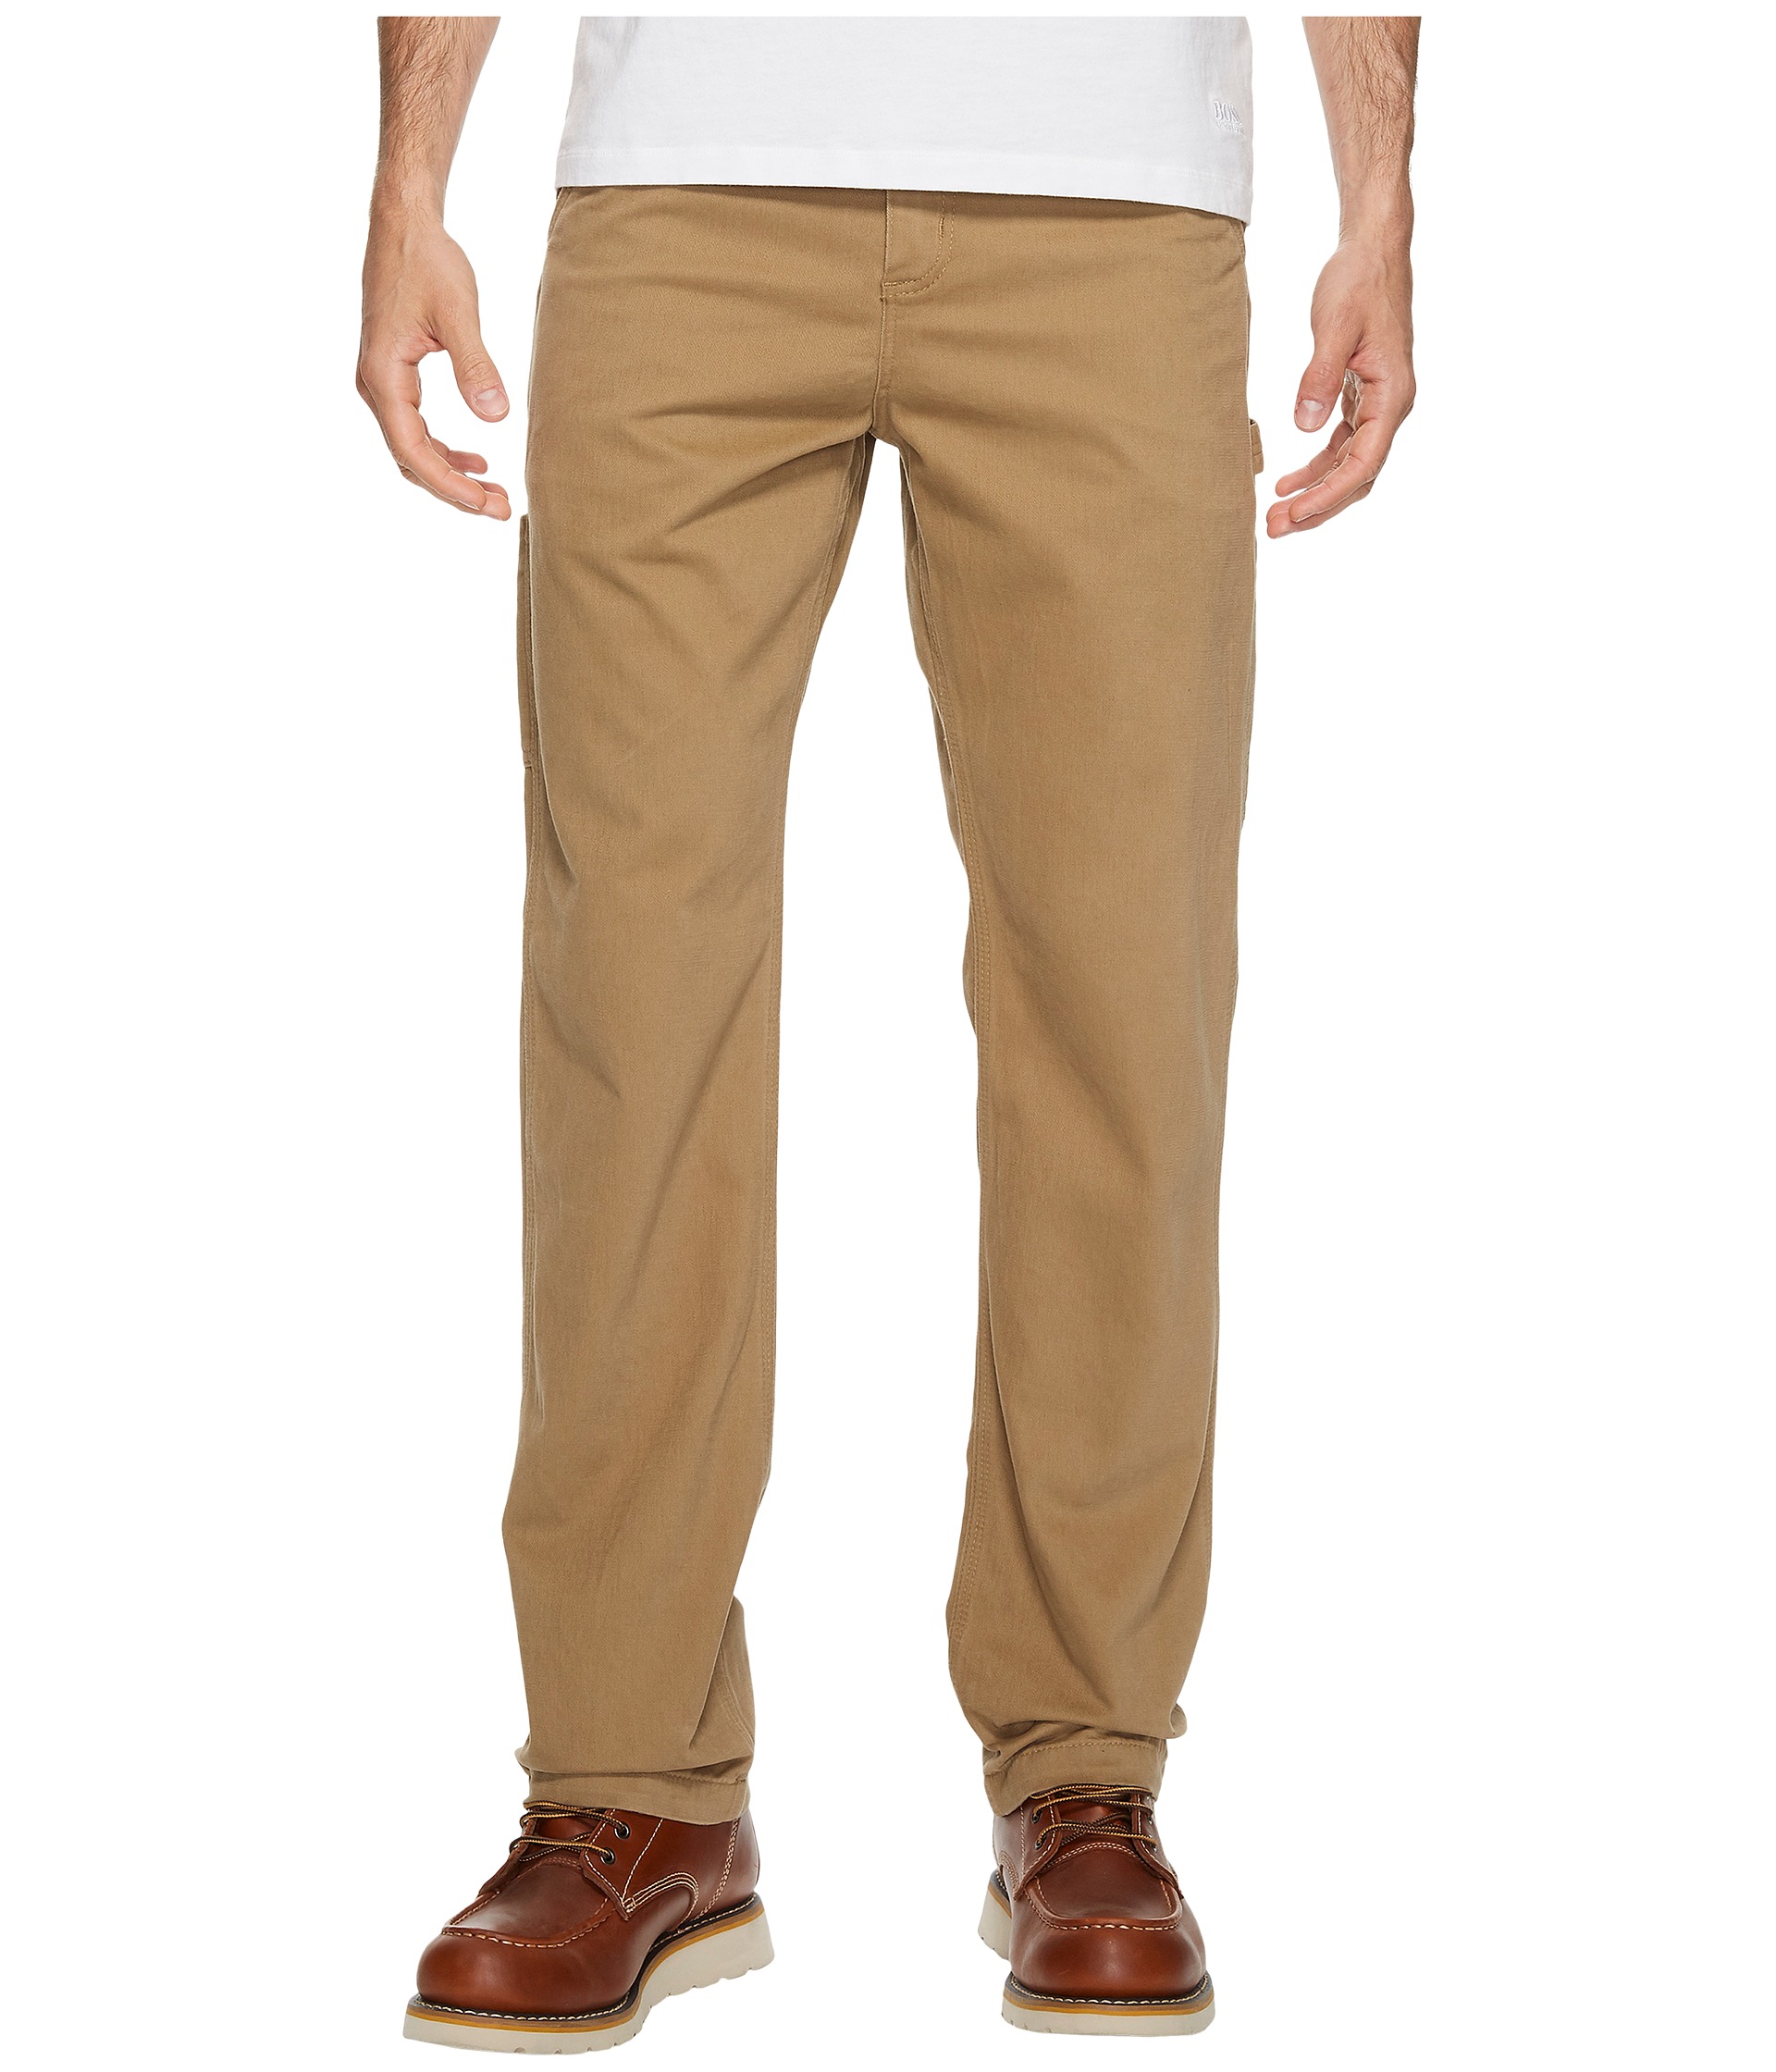 Carhartt Washed Twill Dungaree at Zappos.com